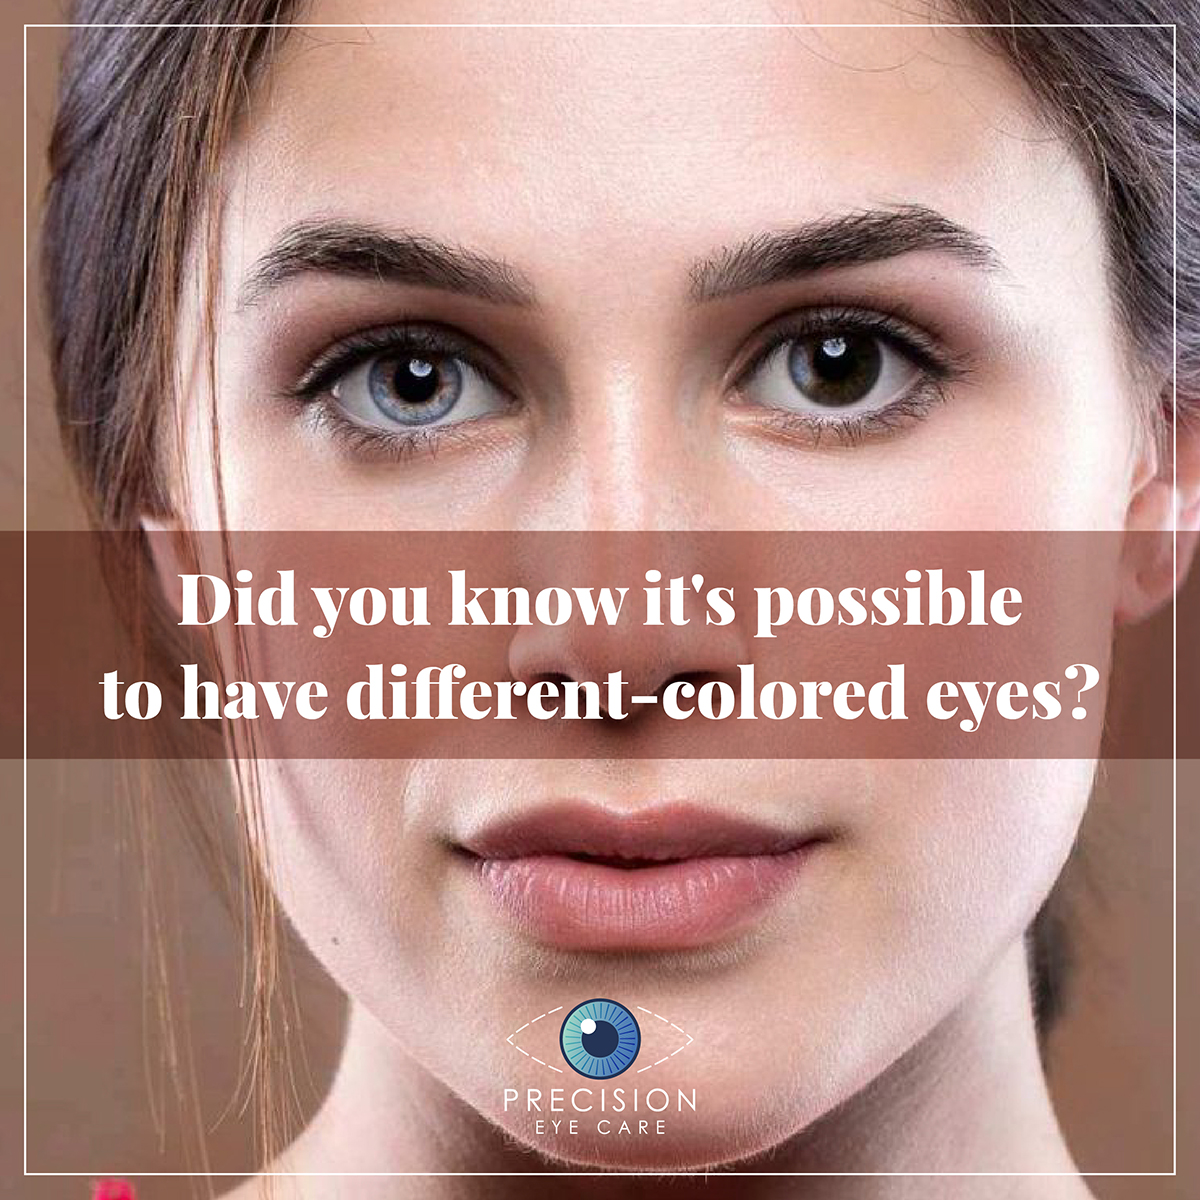 Did you know it’s possible to have different-colored eyes?